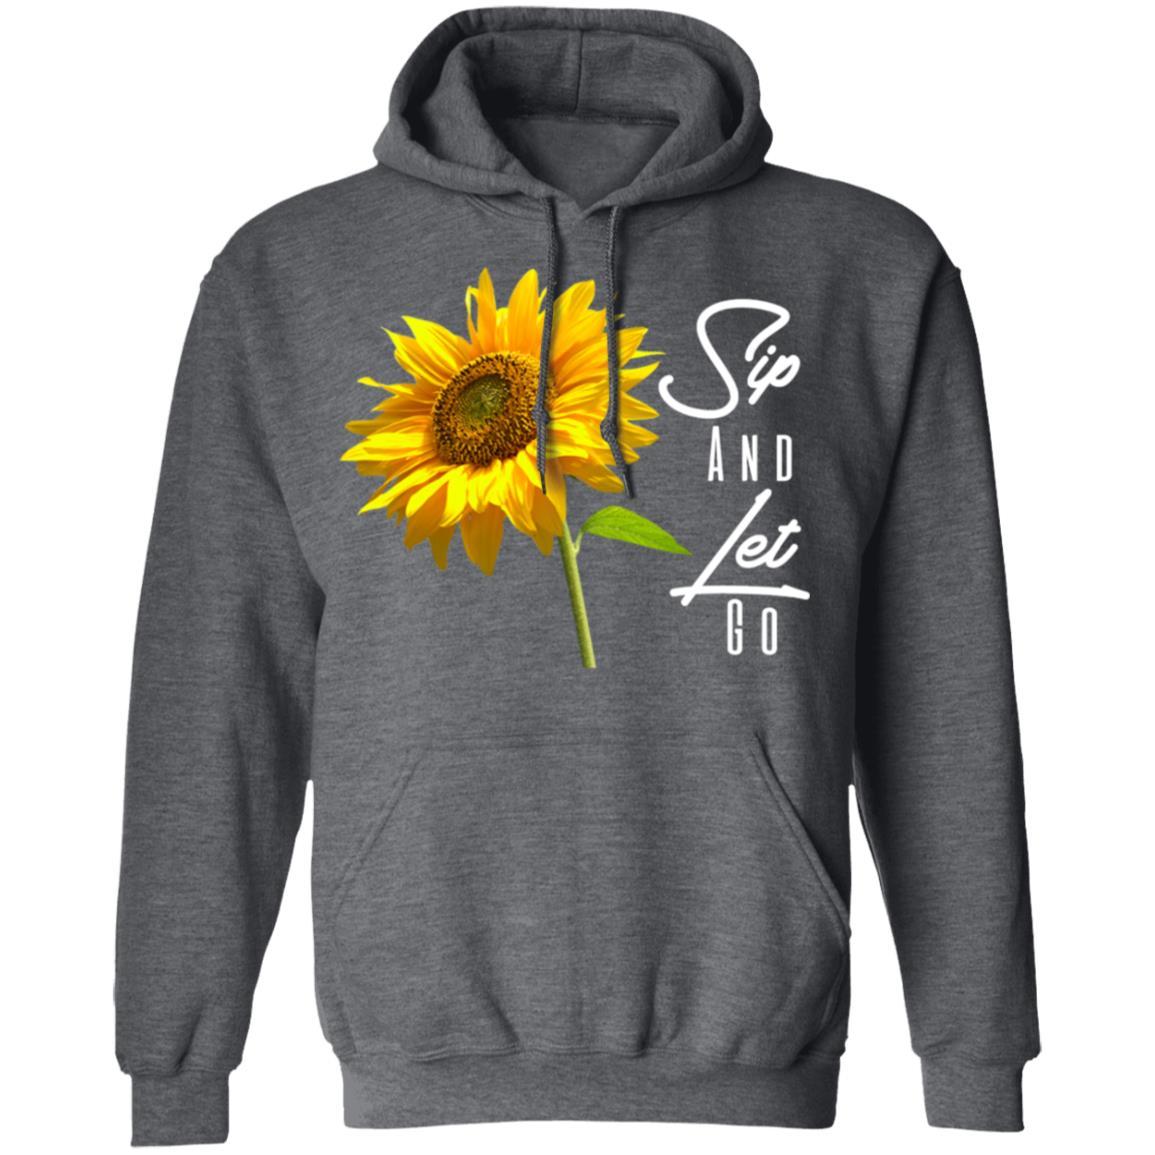 Sip And Let Go Pullover Hoodie - Heather Black - Loyalty Vibes